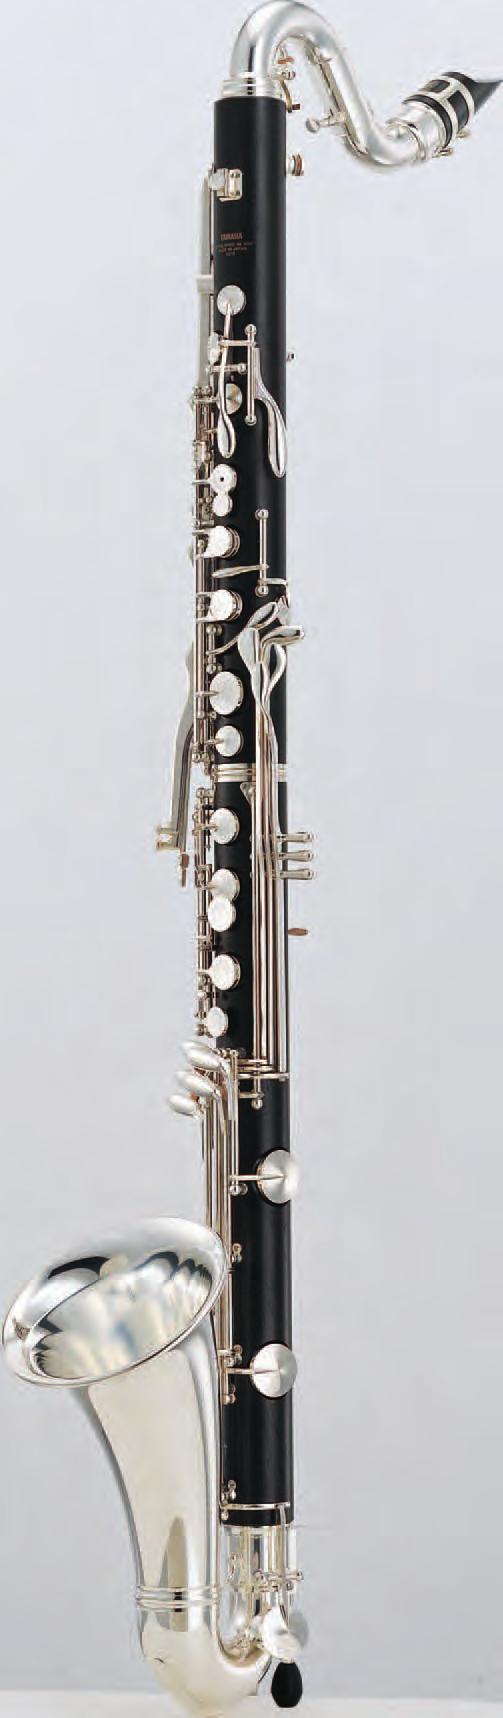 Student B BASS CLARINET YCL-221II Range to low E Matte finish ABS resin body 19 keys, 7 covered